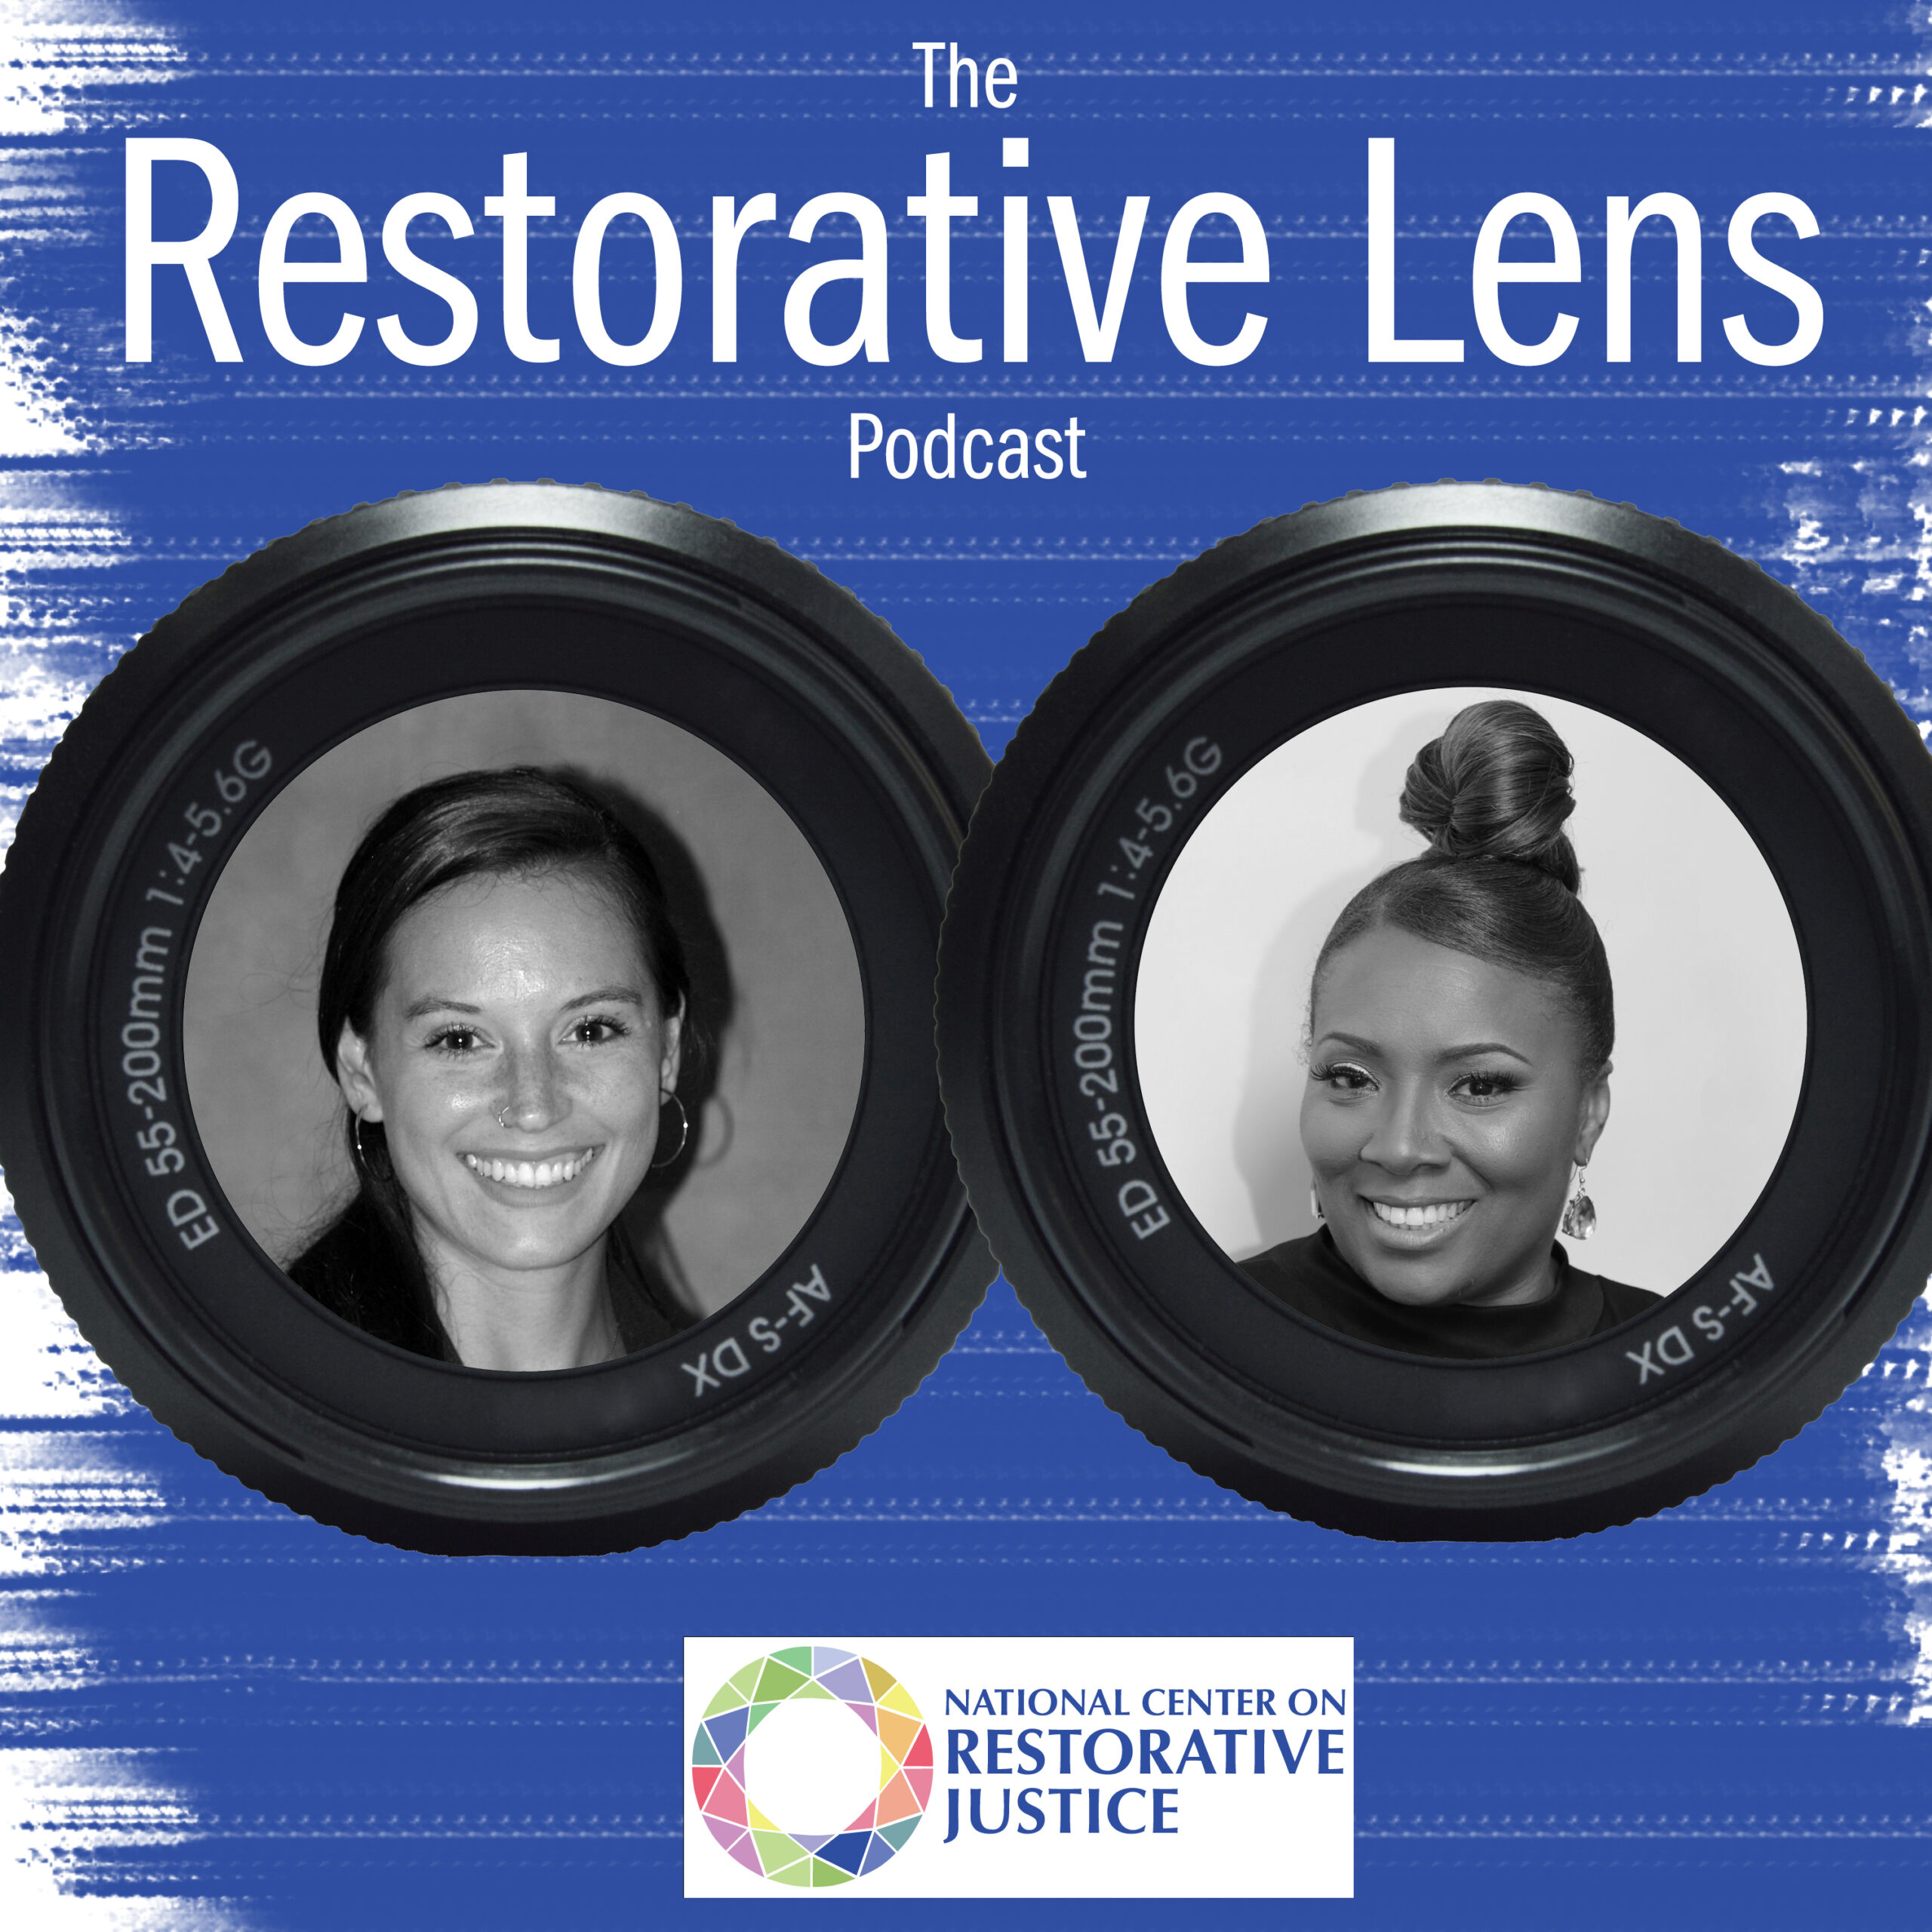 The Restorative Lens Podcast from the National Center on Restorative Justice